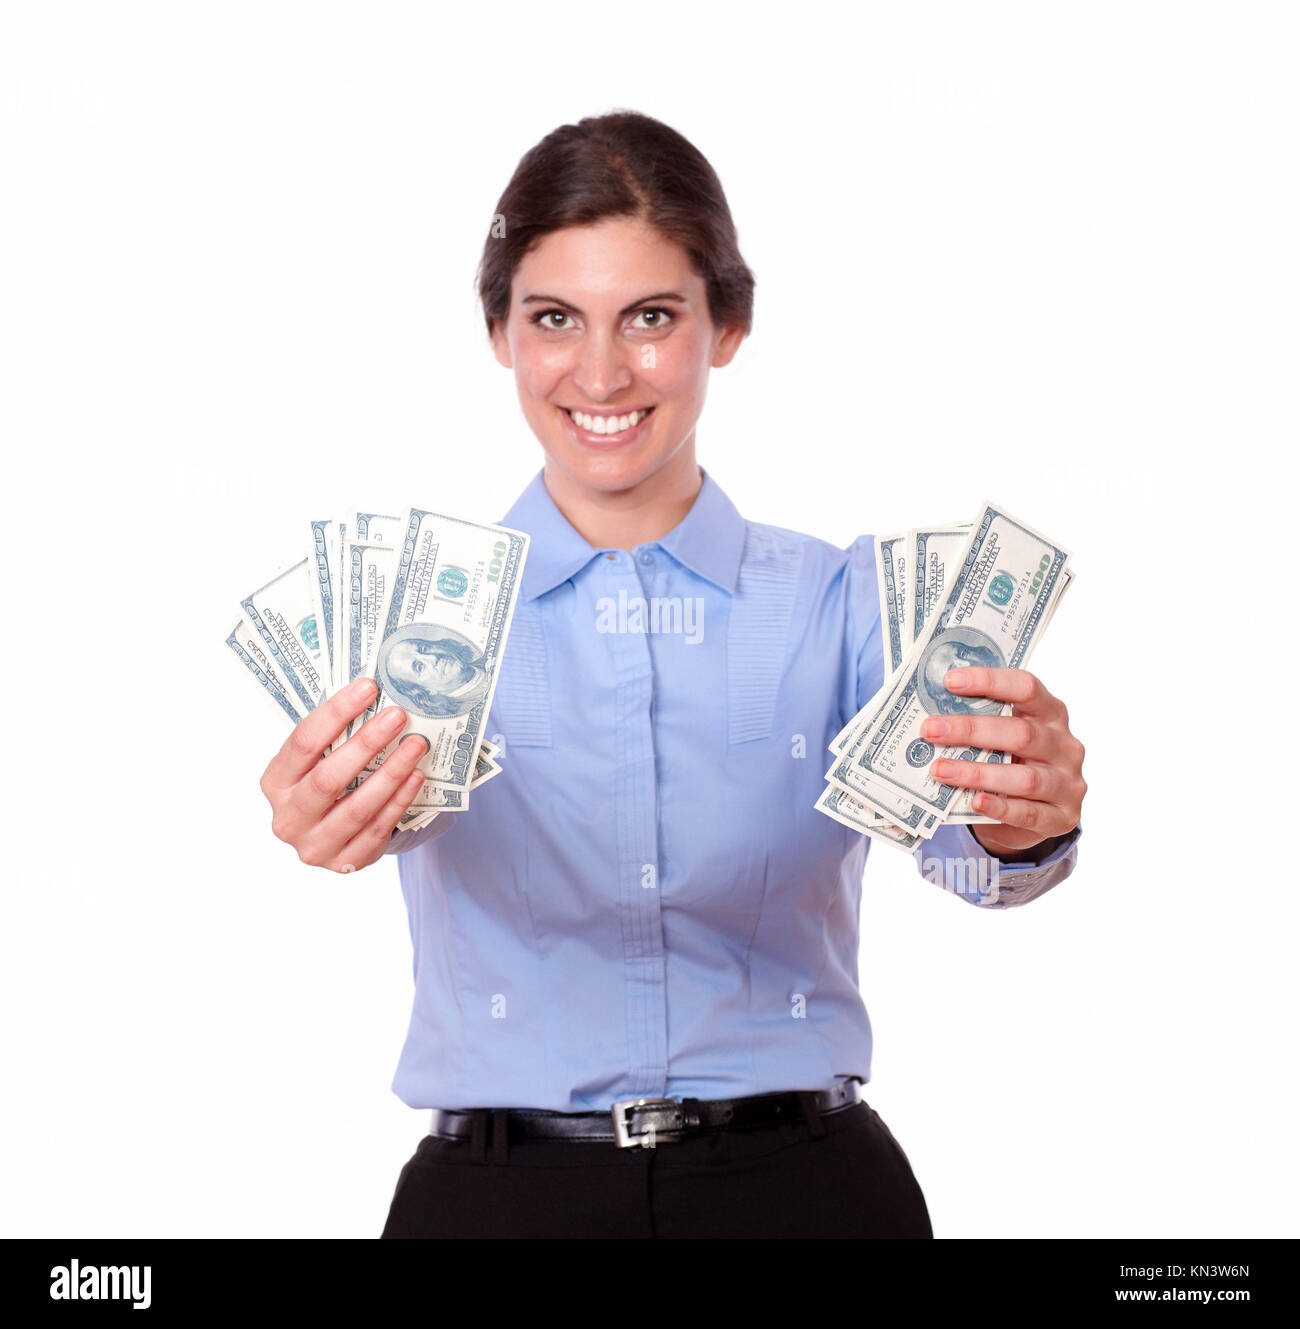 Portrait of an ambitious young woman in blue blouse smiling while holding cash dollars, on isolated white background. Stock Photo